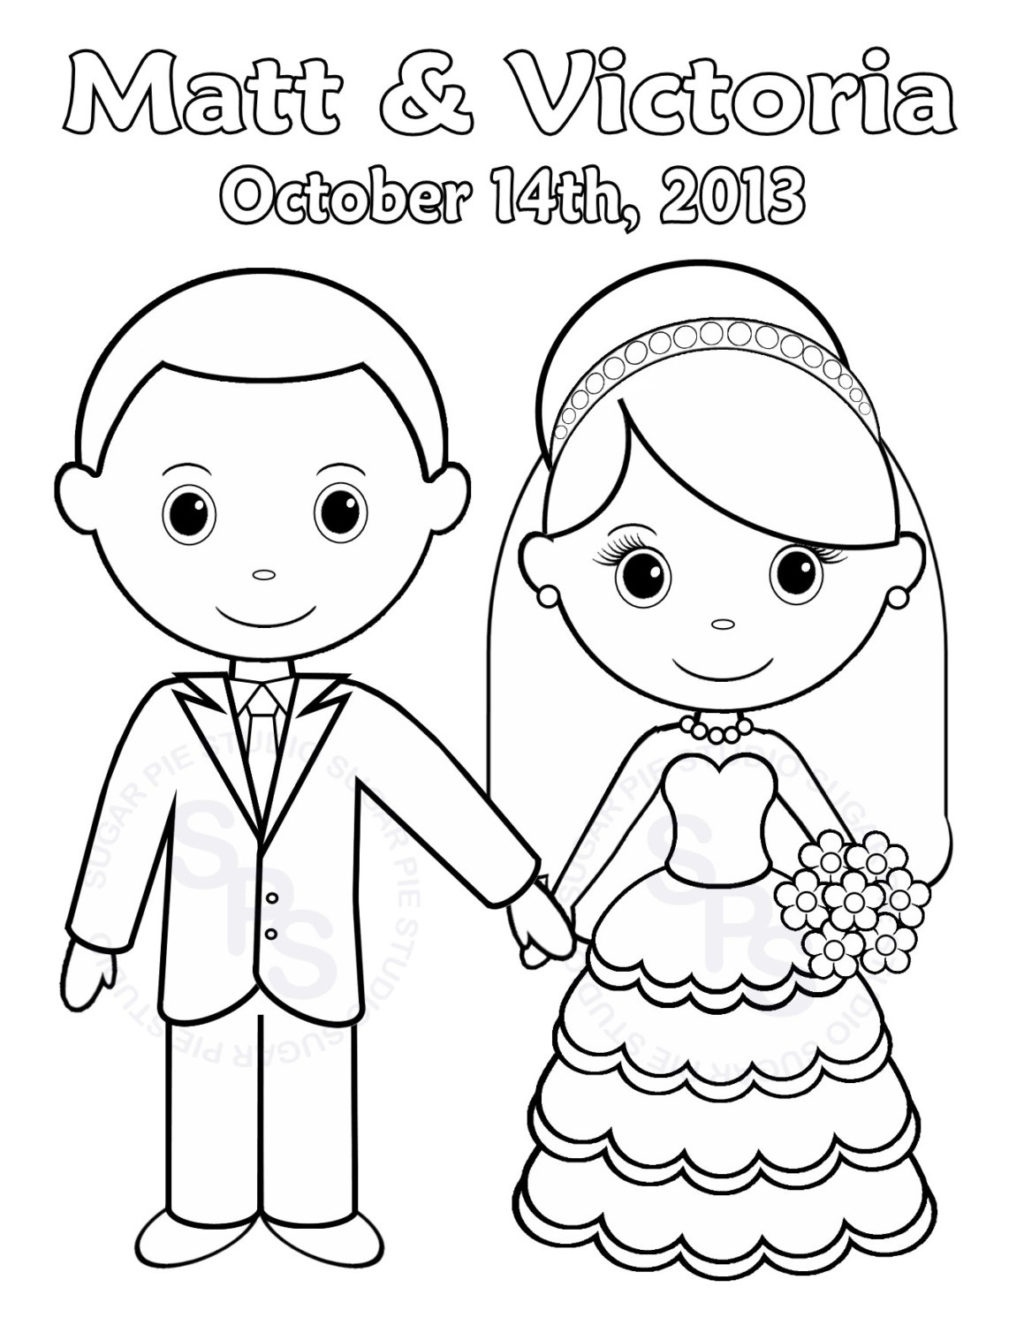 Coloring Book World ~ Coloring Pages Zoloftonline Buy Info Page - Wedding Coloring Book Free Printable